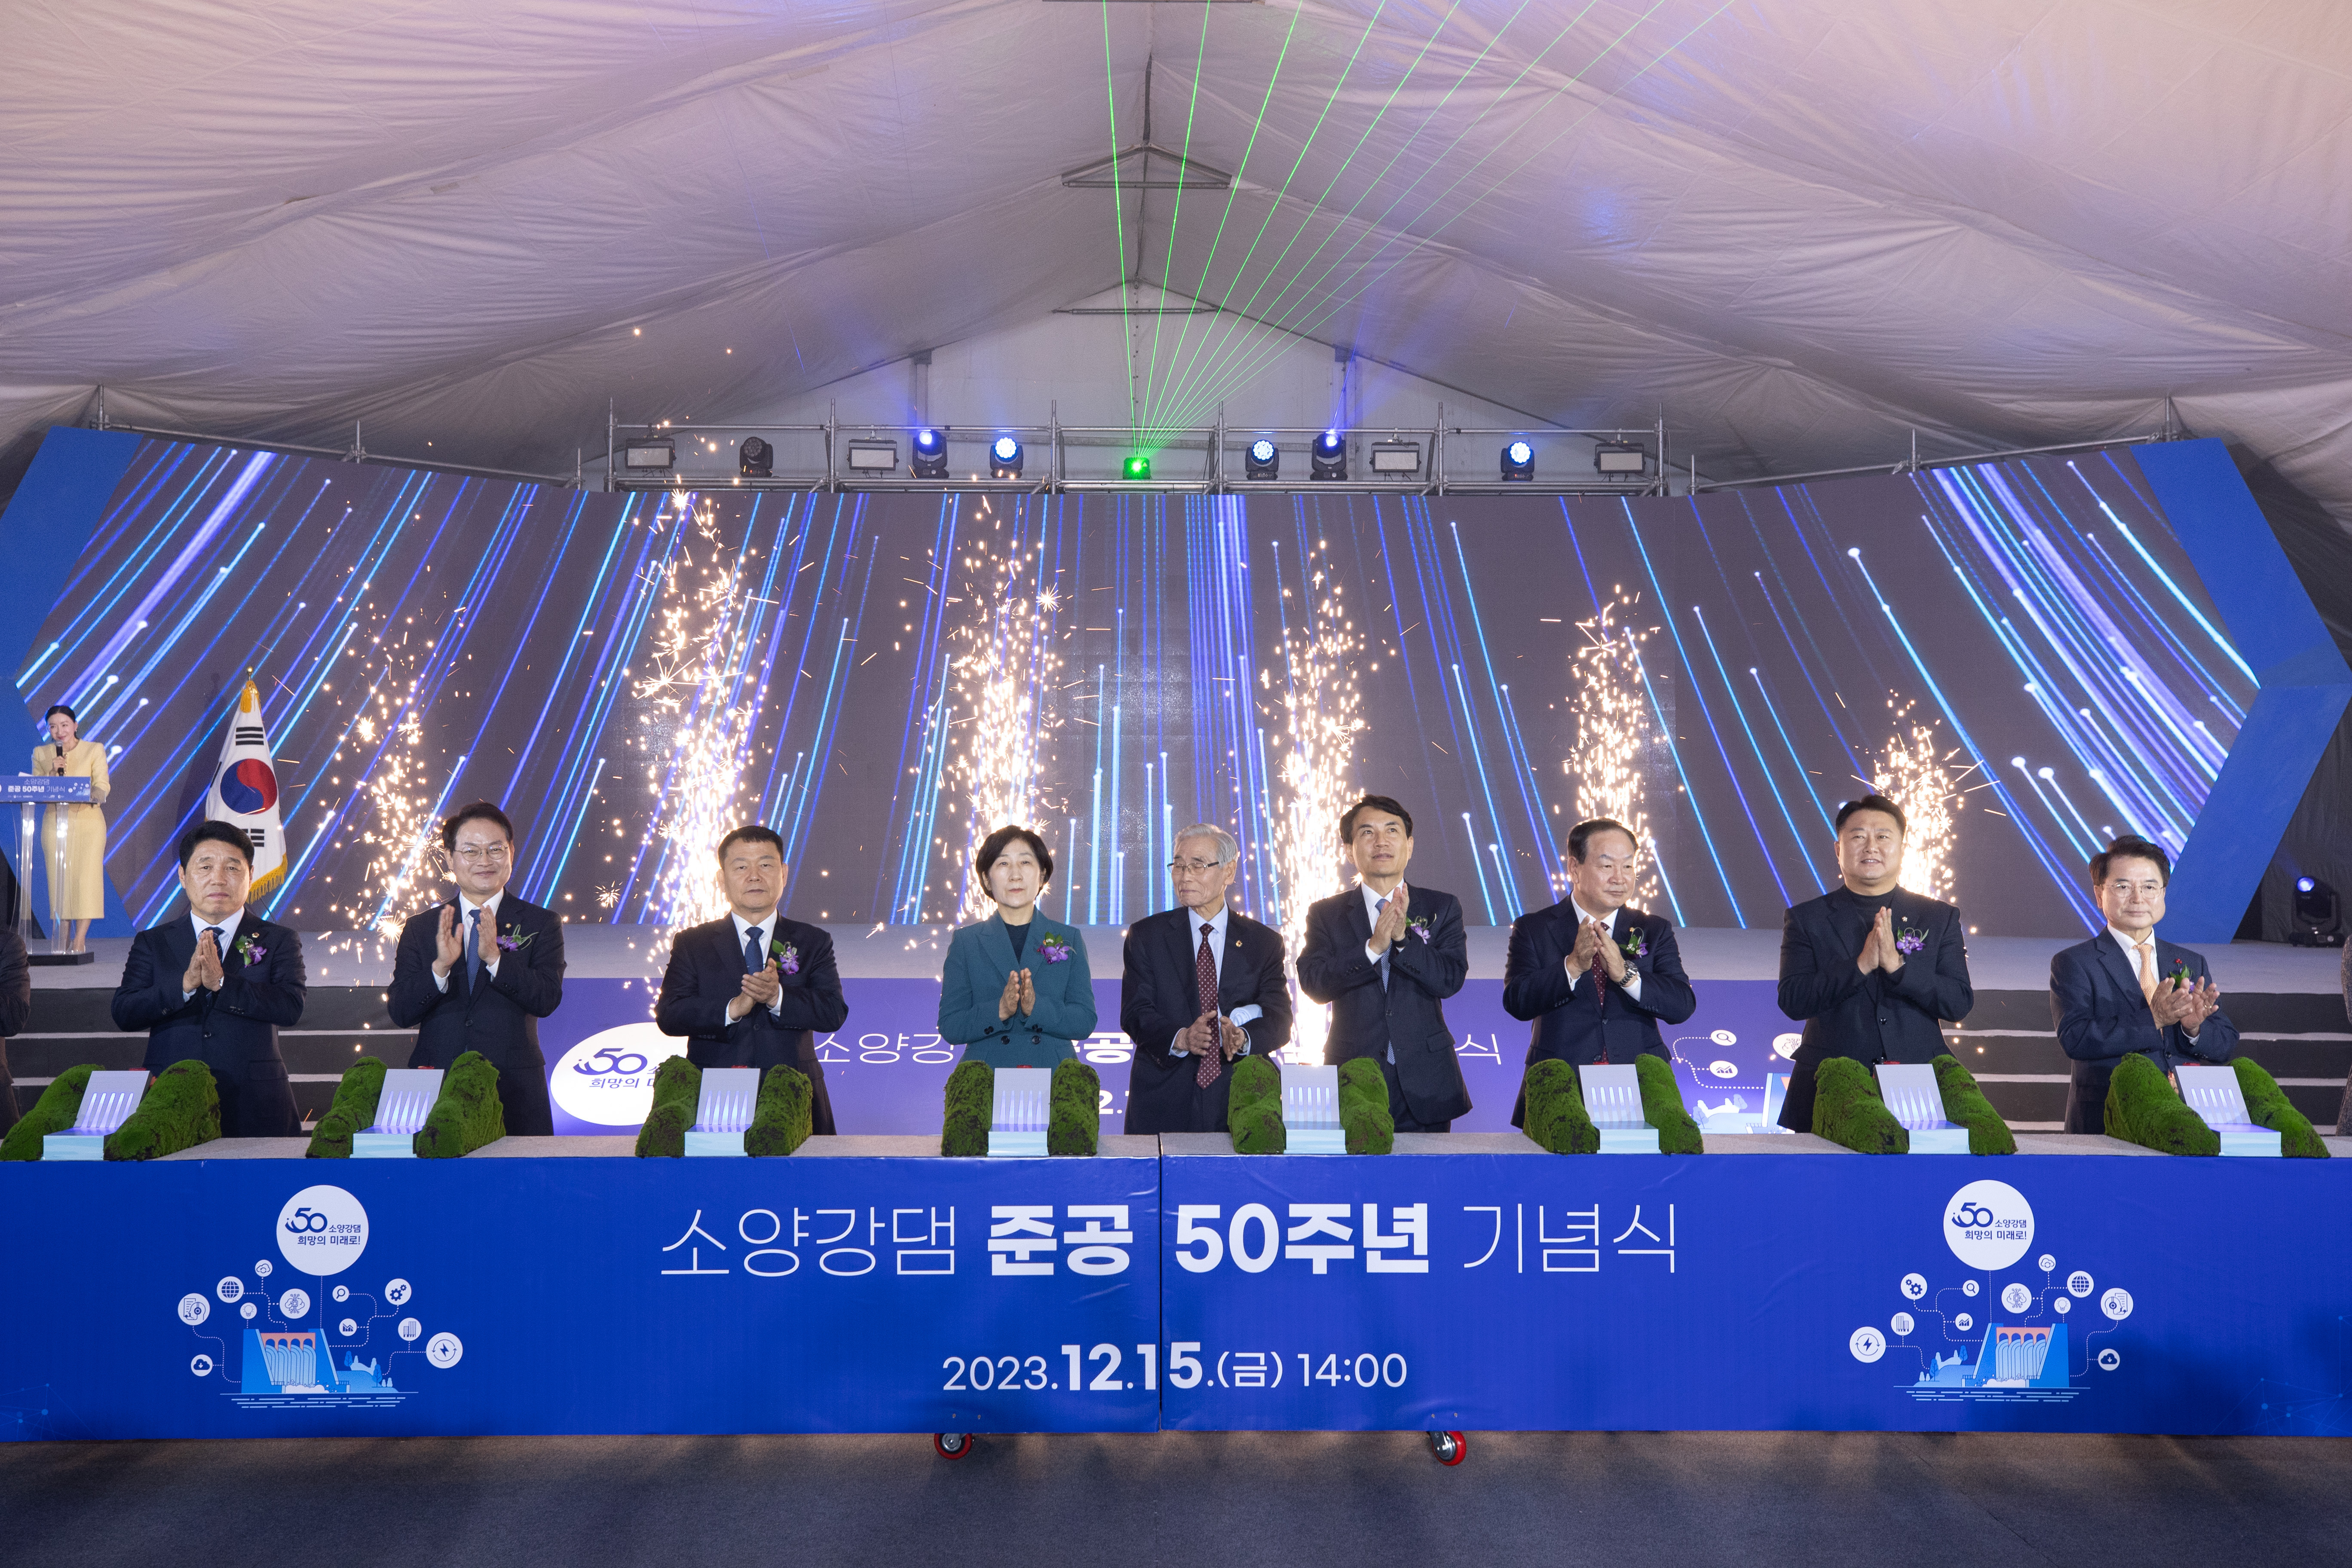 50th Anniversary Commemoration Ceremony of the Completion of Soyang River Dam